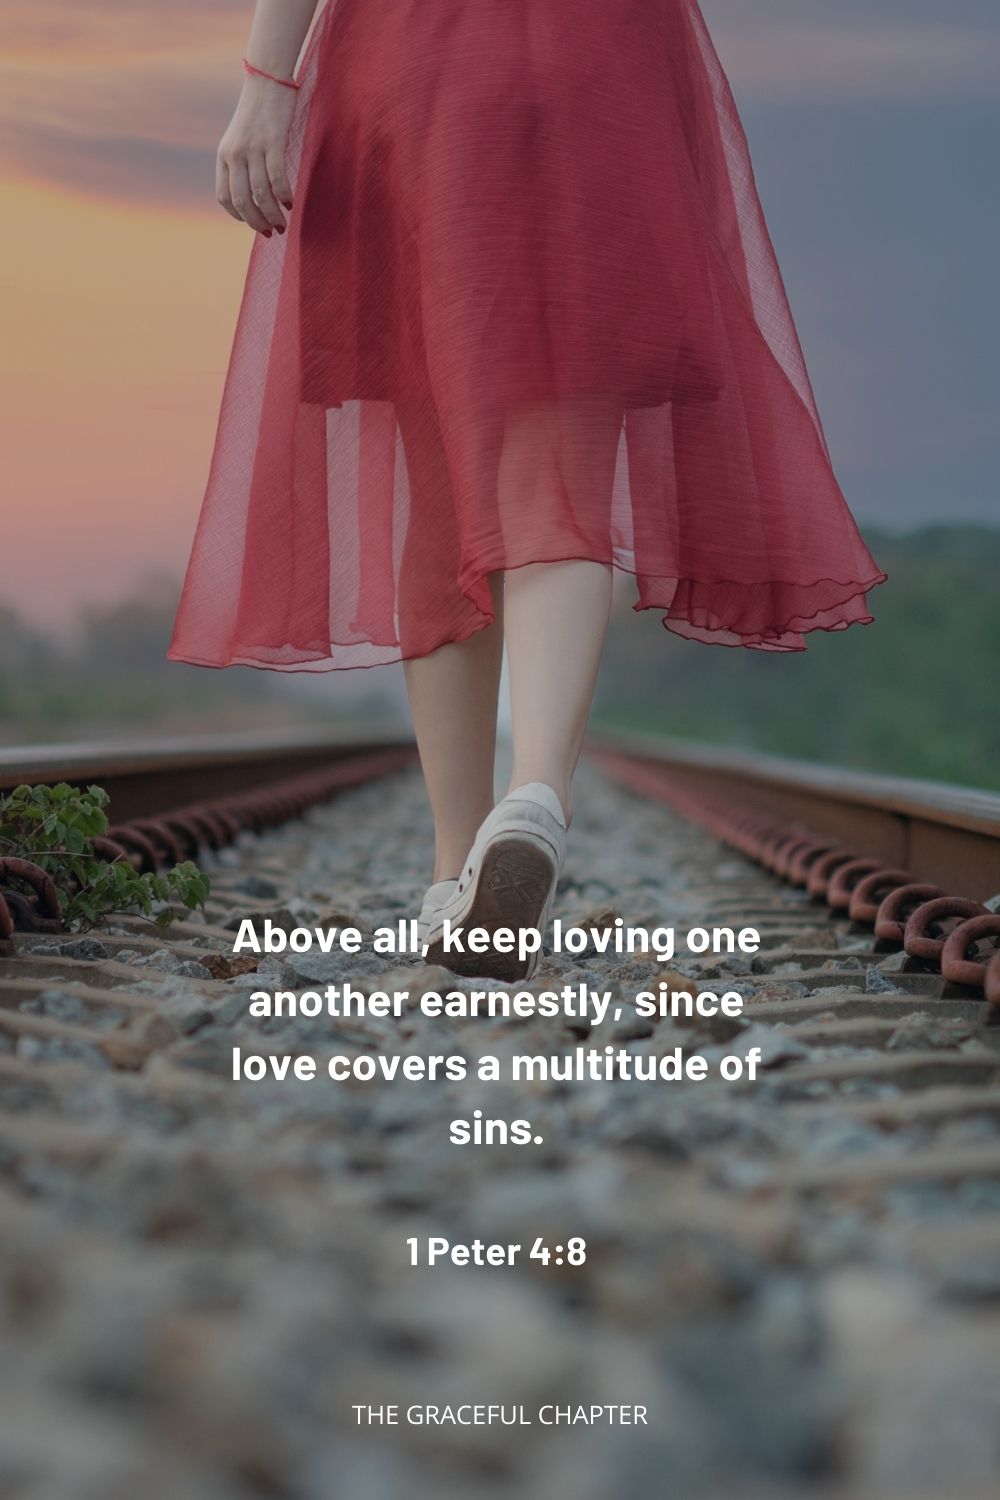 Above all, keep loving one another earnestly, since love covers a multitude of sins. 1 Peter 4:8